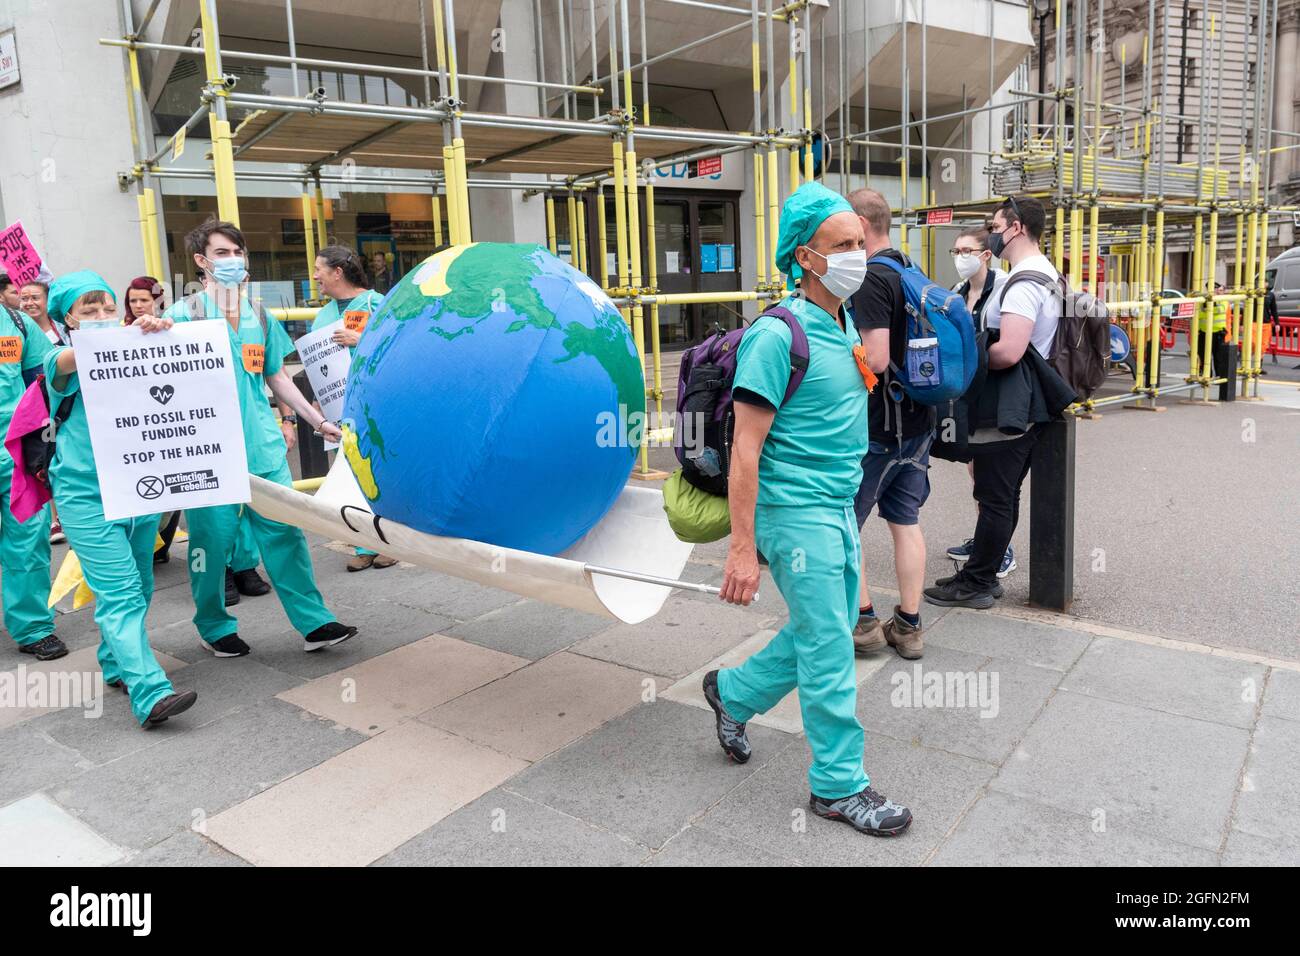 Doctors carry the world on a stretcher during Extinction Rebellion's Impossible Rebellion protest continues march to the Department for Business Energy and Industrial Strategy under the banner of Stop The Harm protesting against climate change, global warming, and plans to target the root cause of the climate and ecological crisis and to demand the government divest from fossil fuel companies. (Photo by Dave Rushen / SOPA Images/Sipa USA) Stock Photo